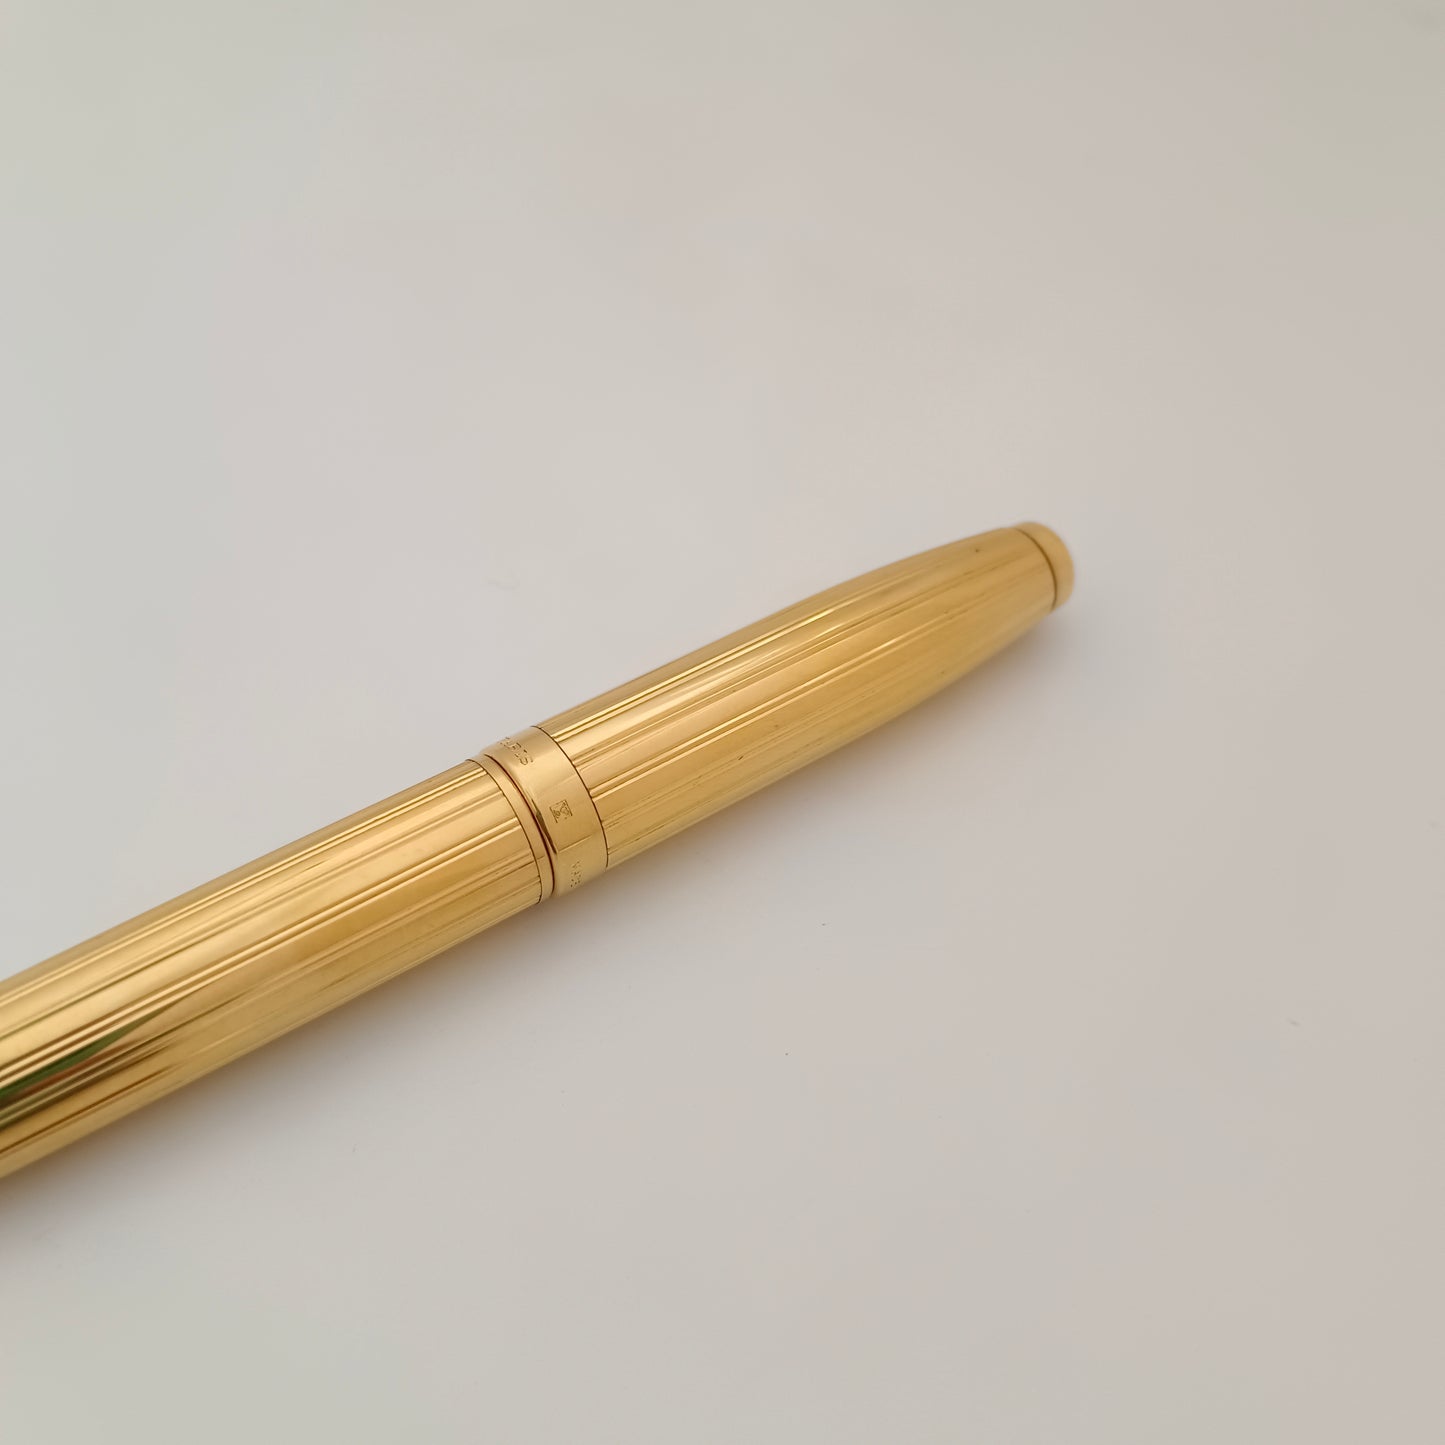 ST Dupont Olympio Gold Plated Pencil